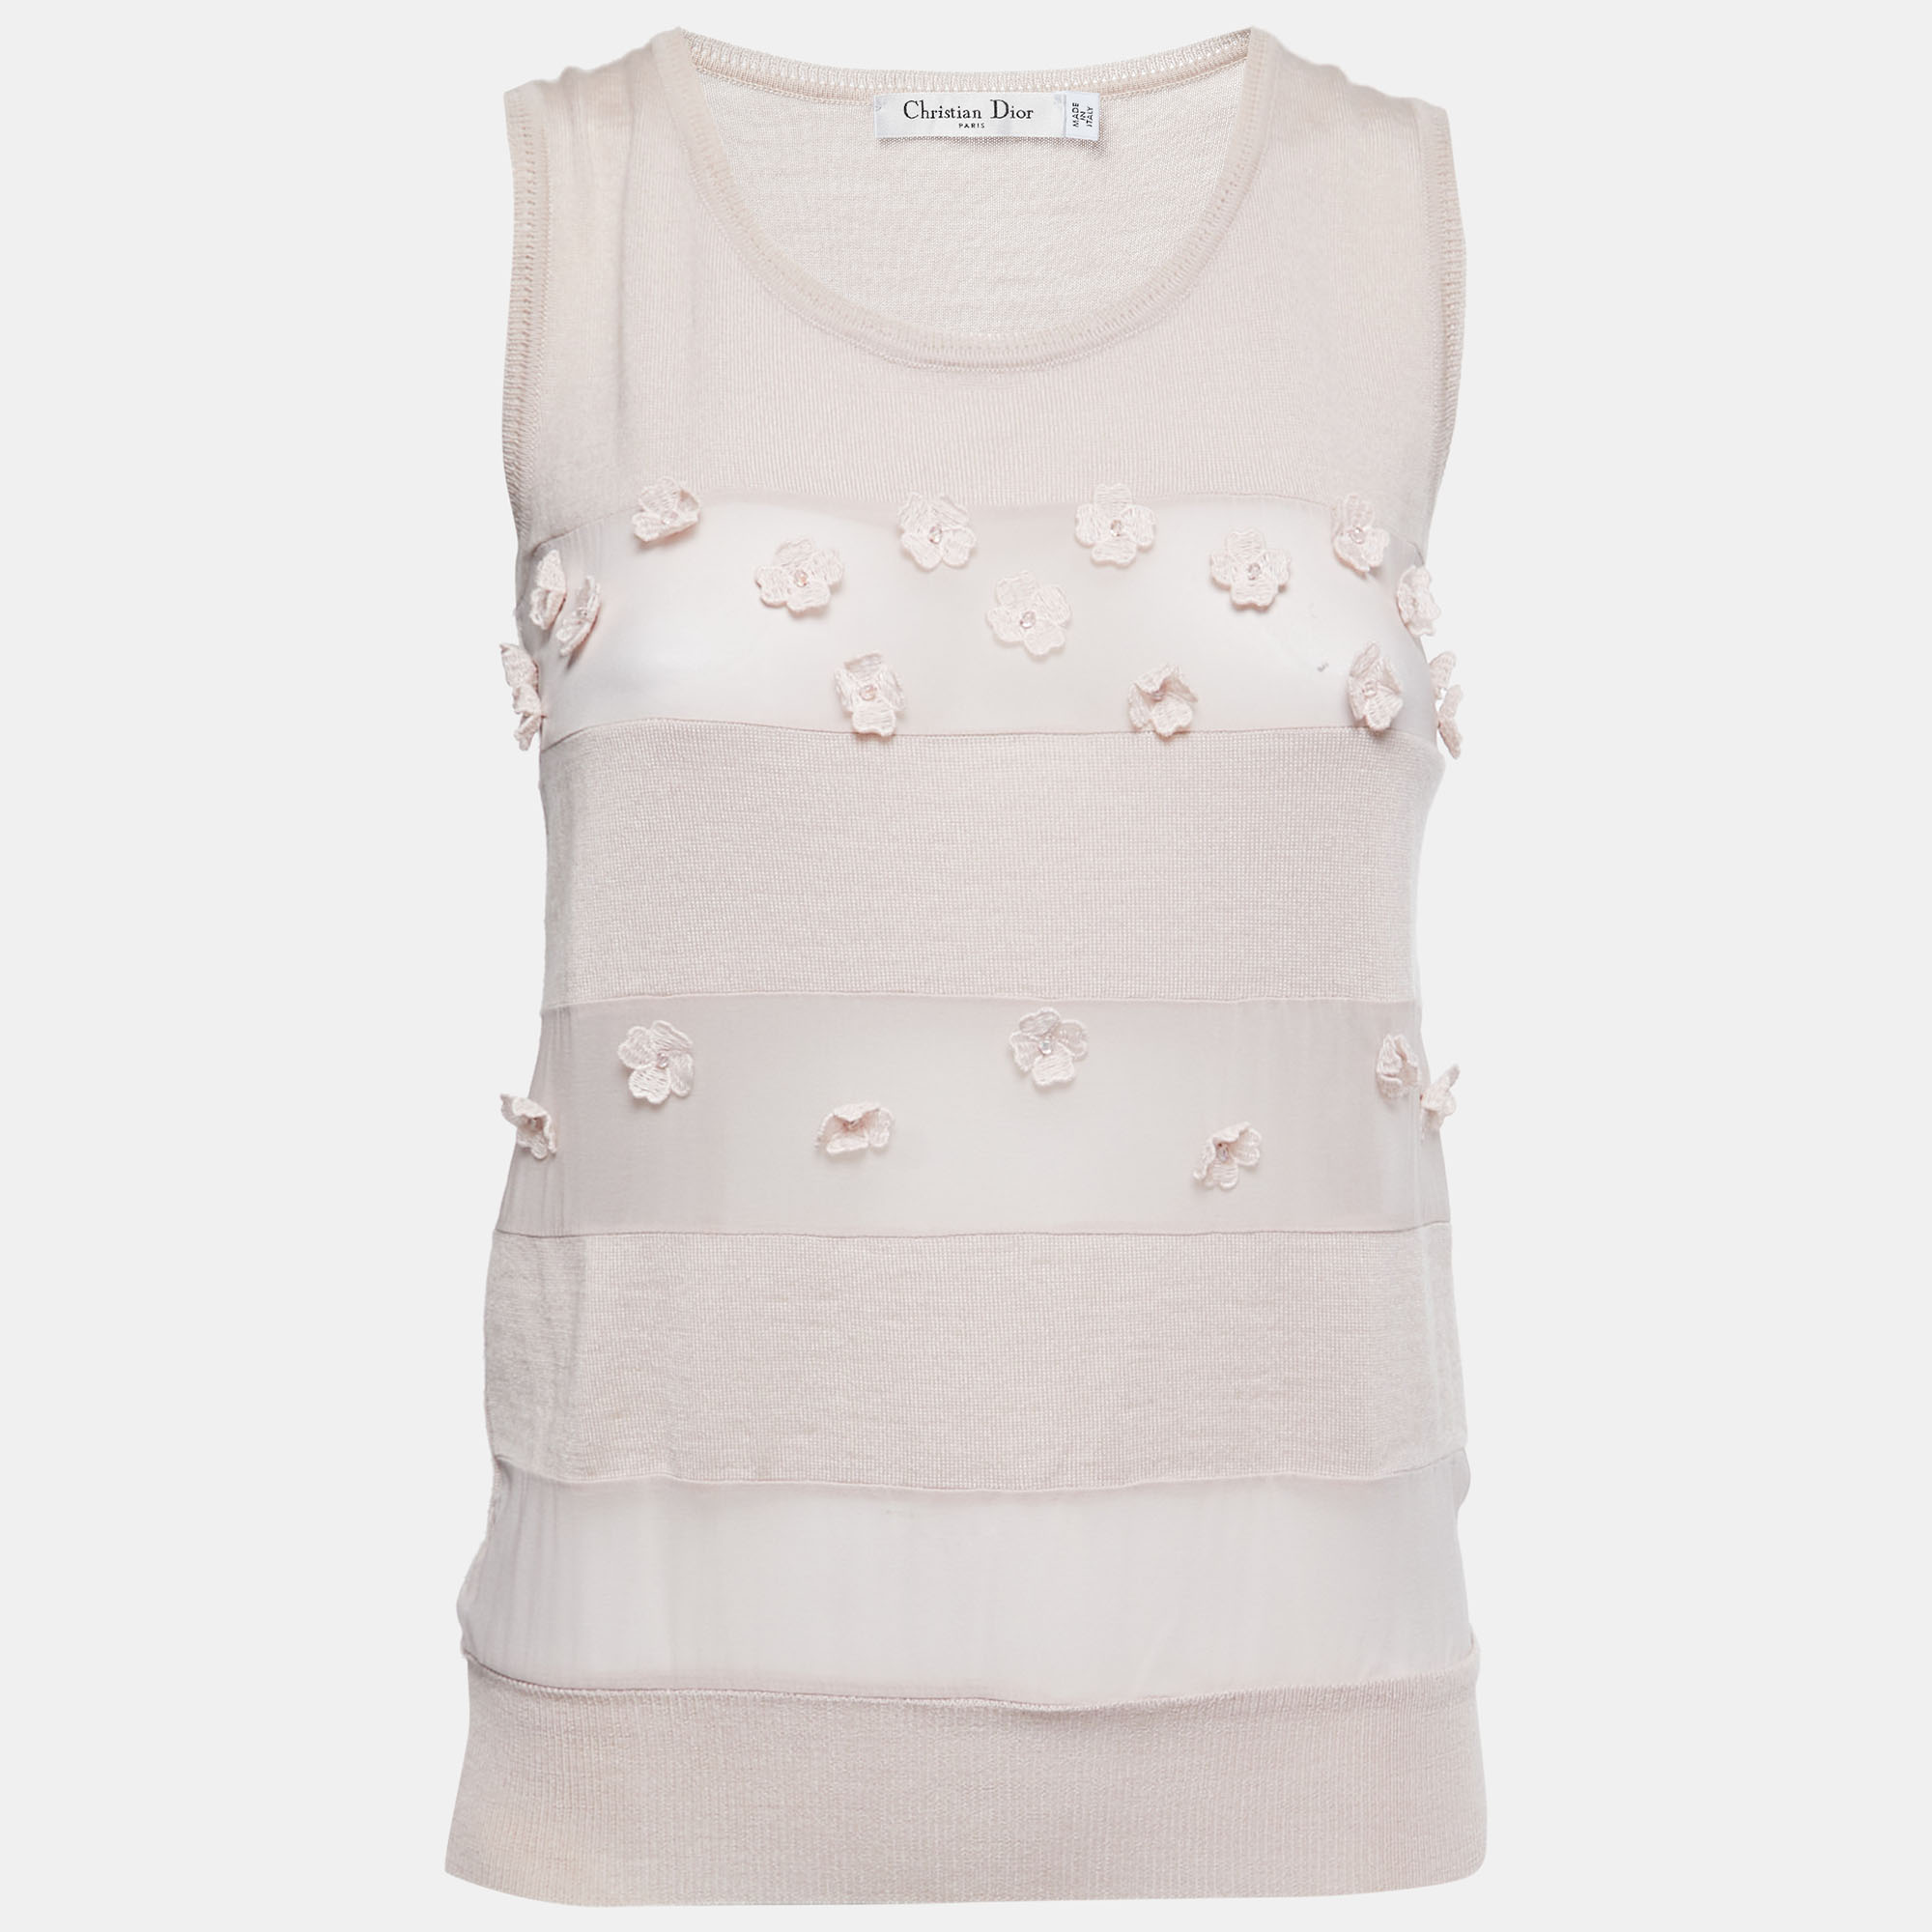 Dior Dusty Pink Knit Floral Embroidered Sleeveless Top M